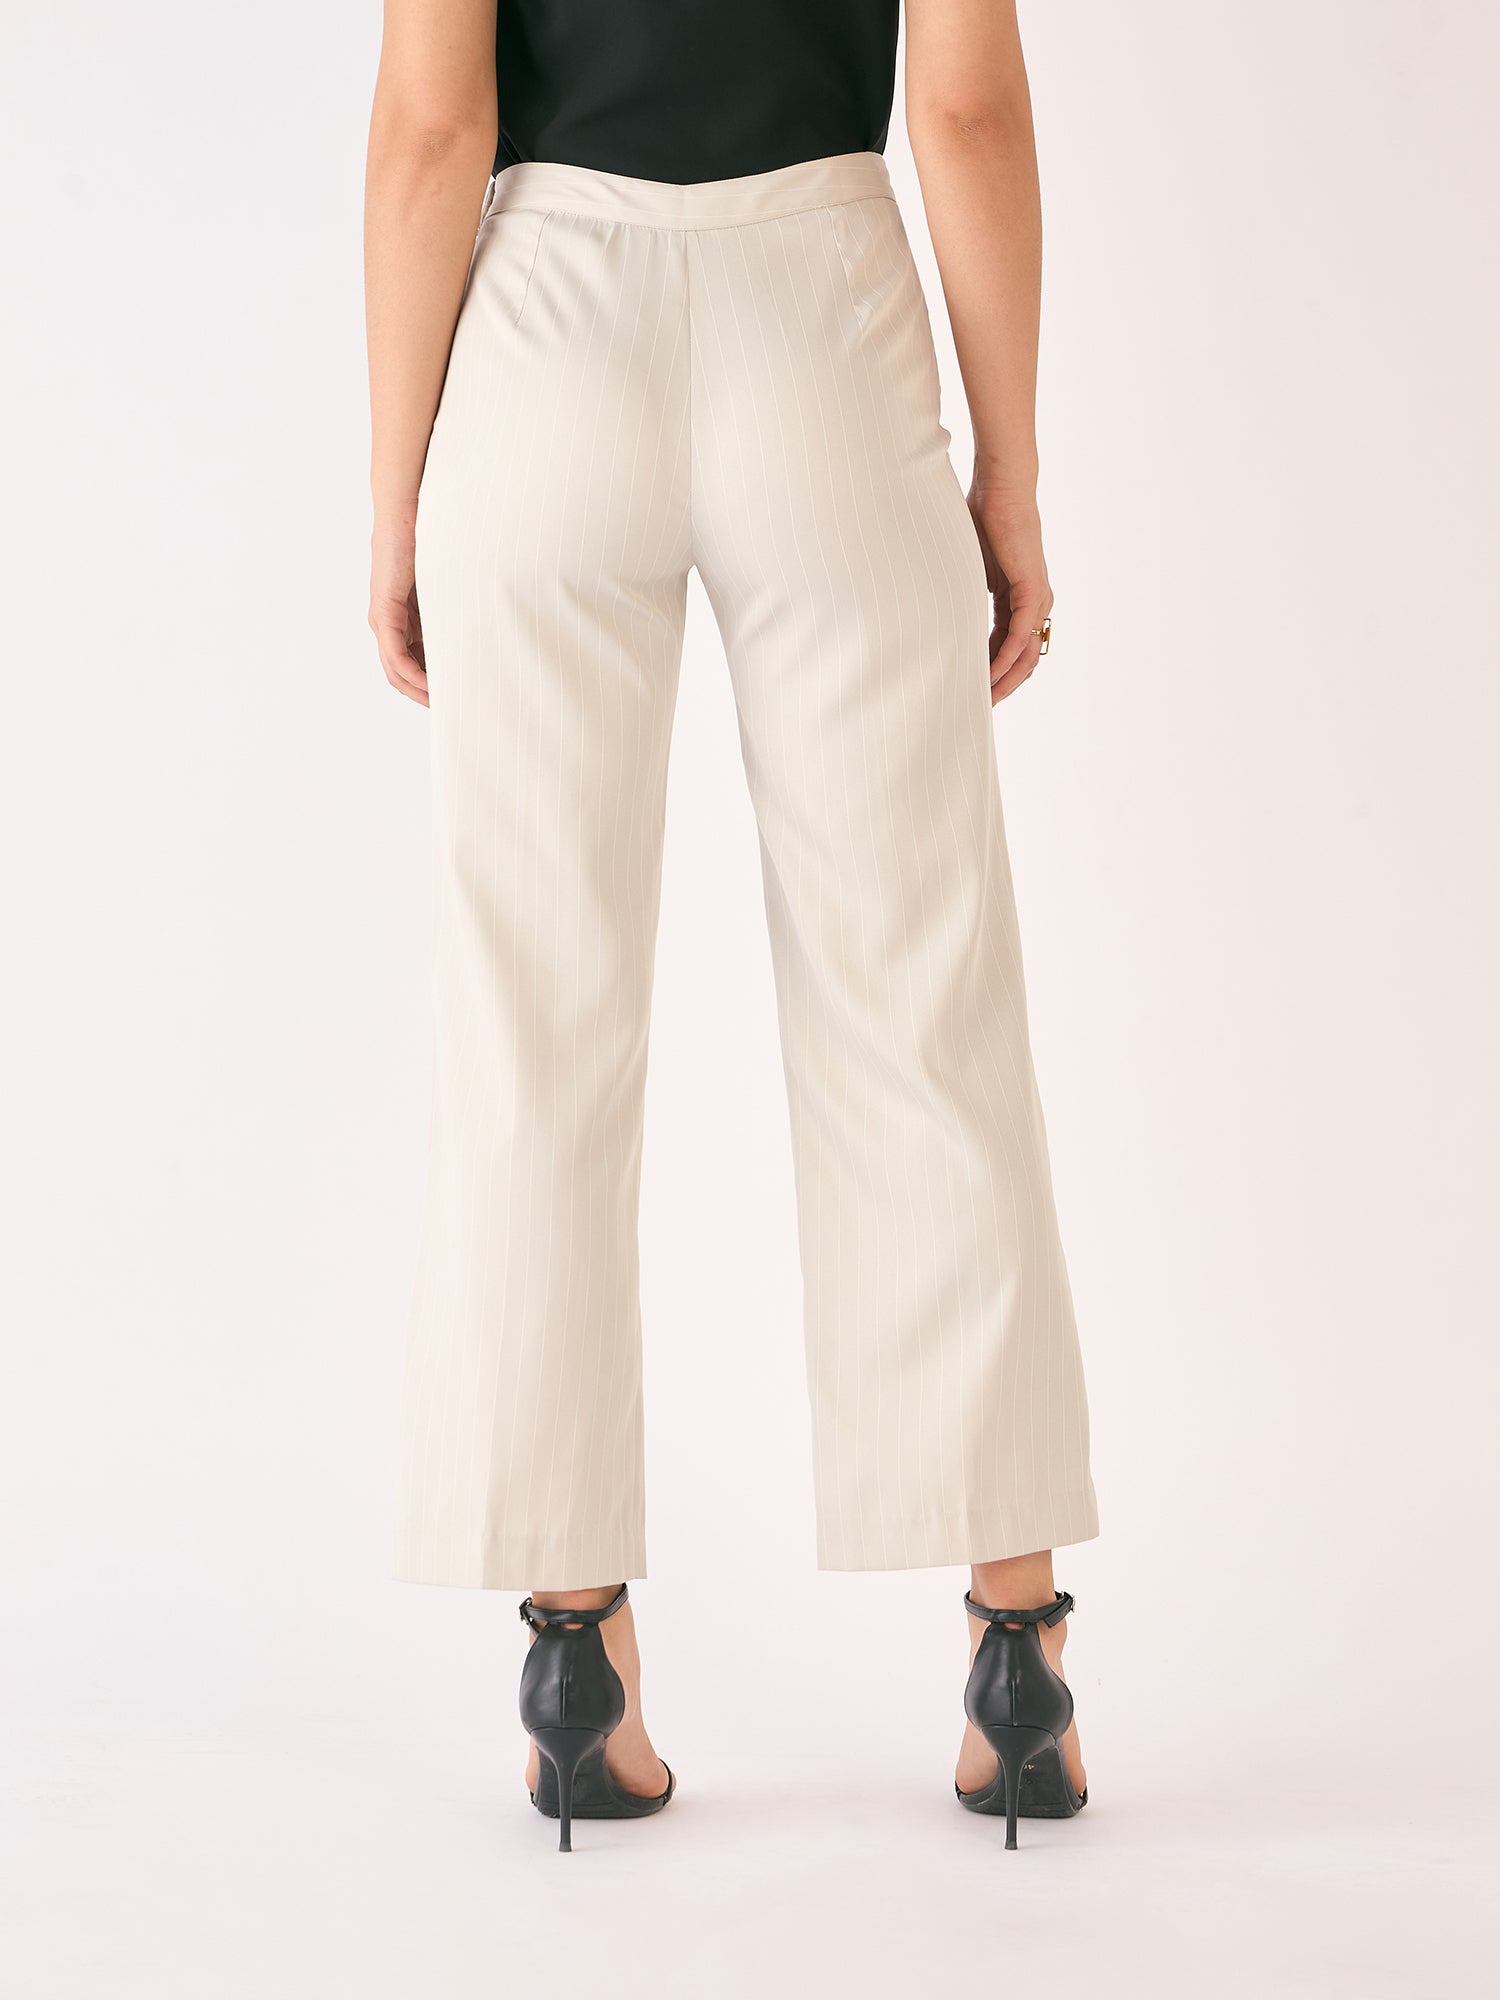 Liberal Striped Formal Side Zip Pant - Off White